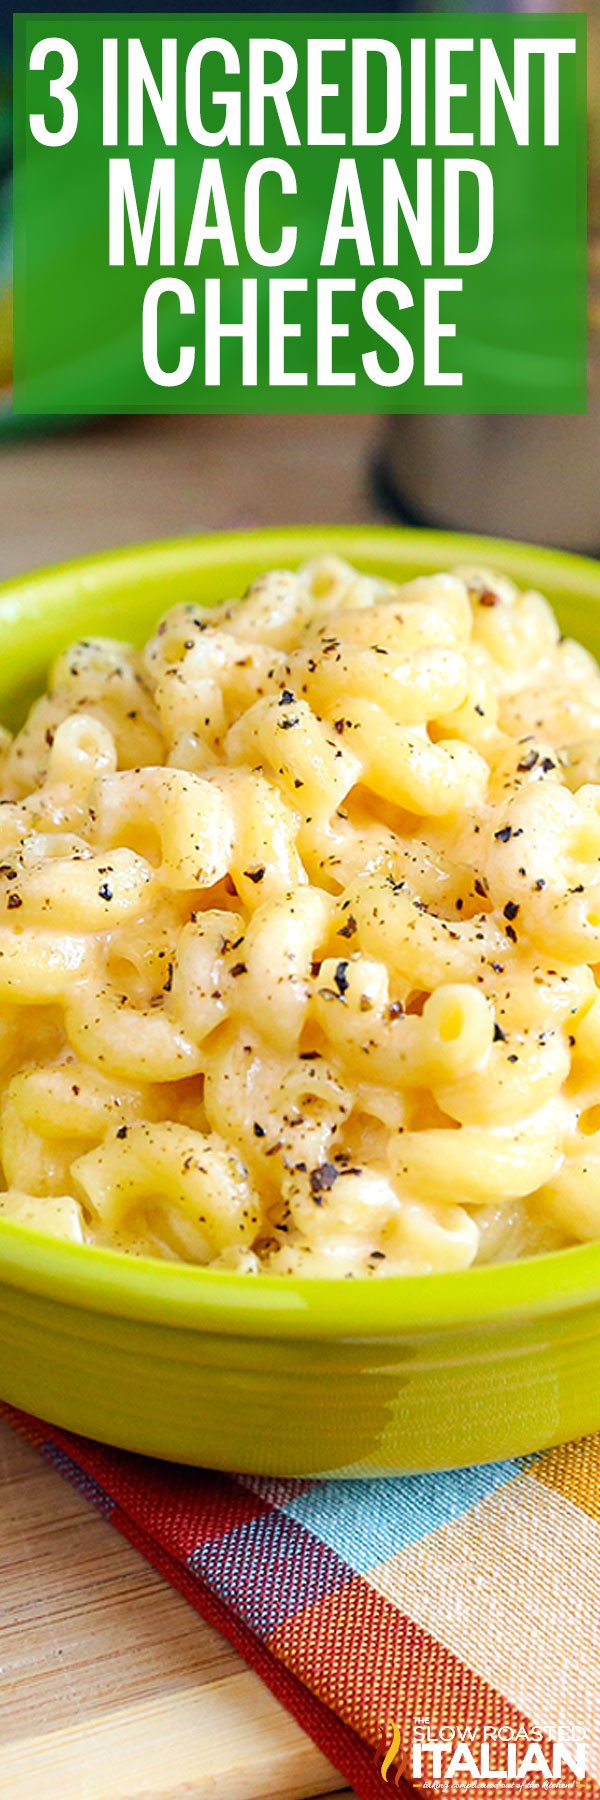 3 Ingredient Mac and Cheese Recipe - PIN